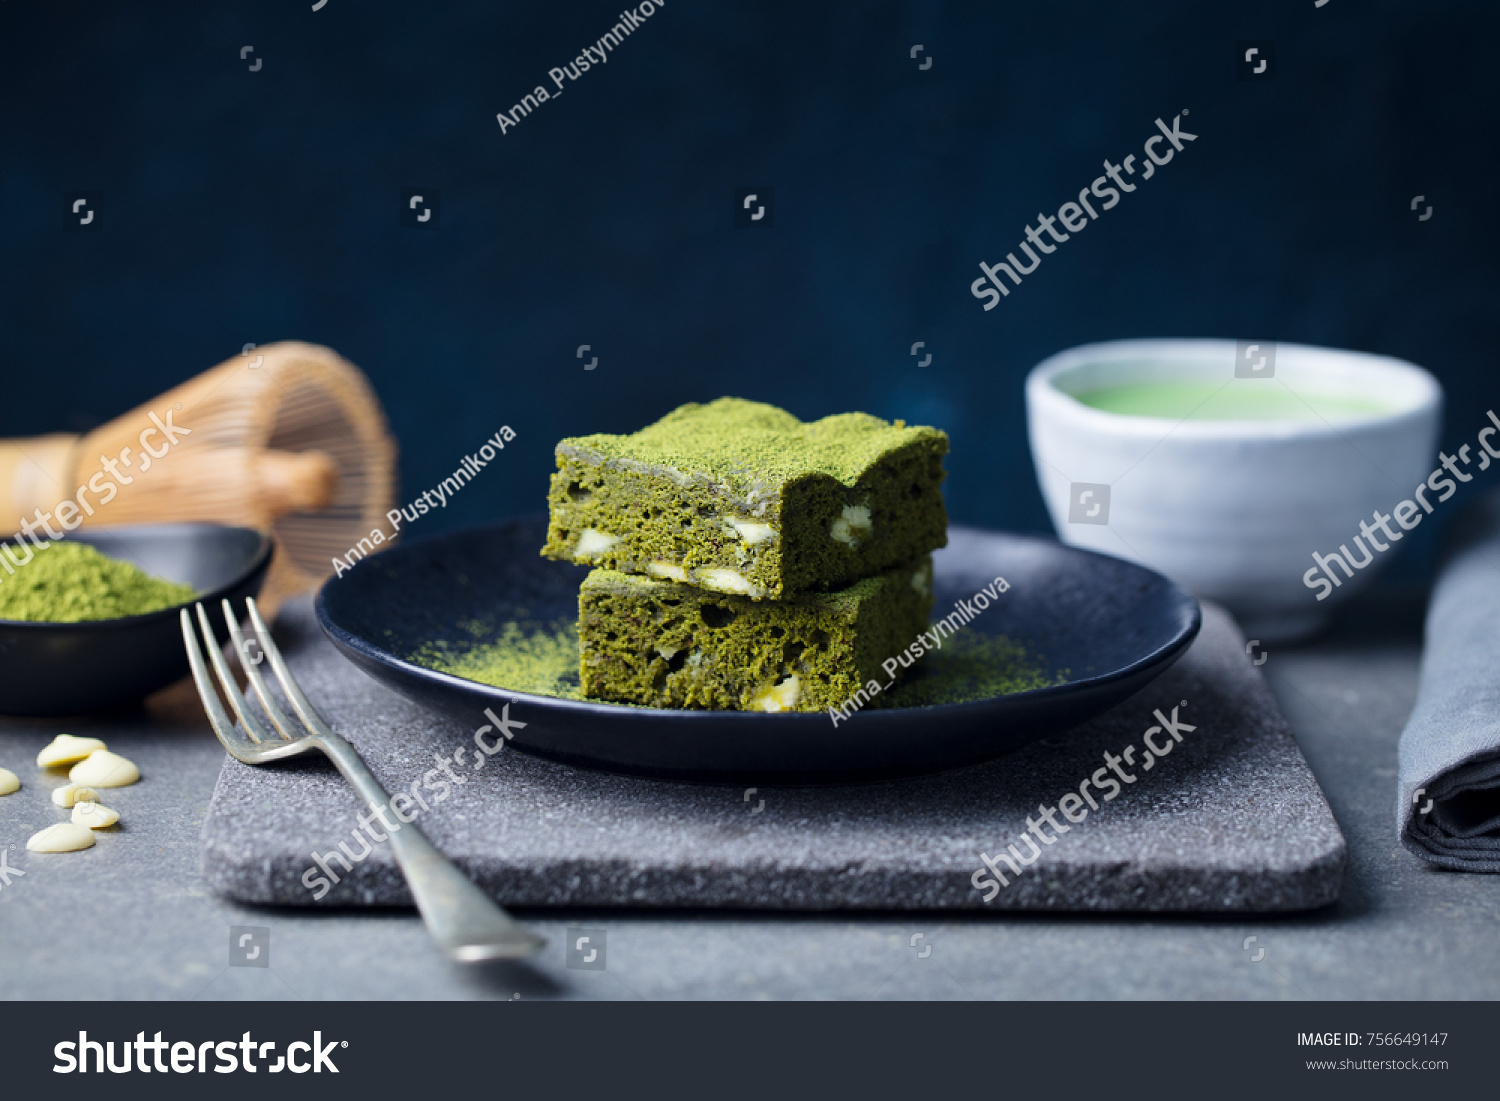 Matcha green tea cake, bars, brownie with white chocolate on a plate. Grey stone background. Copy space. #756649147